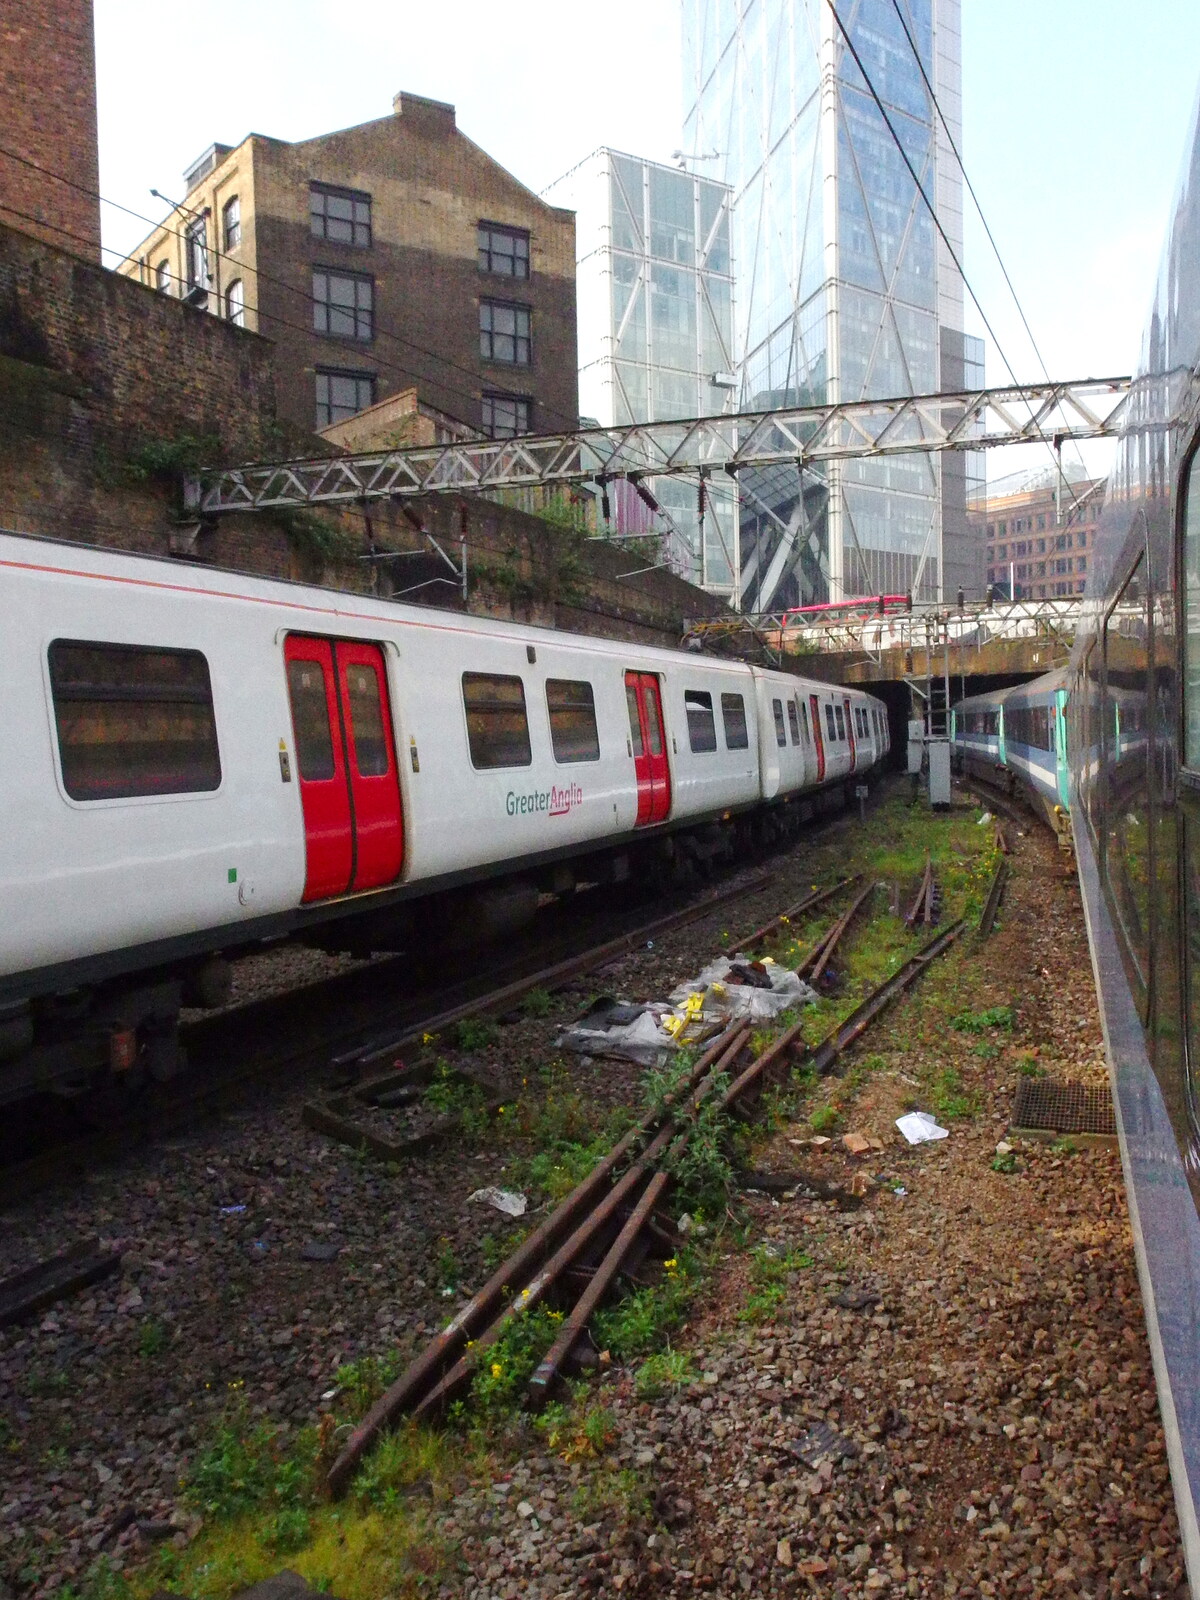 Nosher's train passes a Class 315 tin can from A Trainey Sort of Week, Liverpool Street, City of London - 3rd April 2014